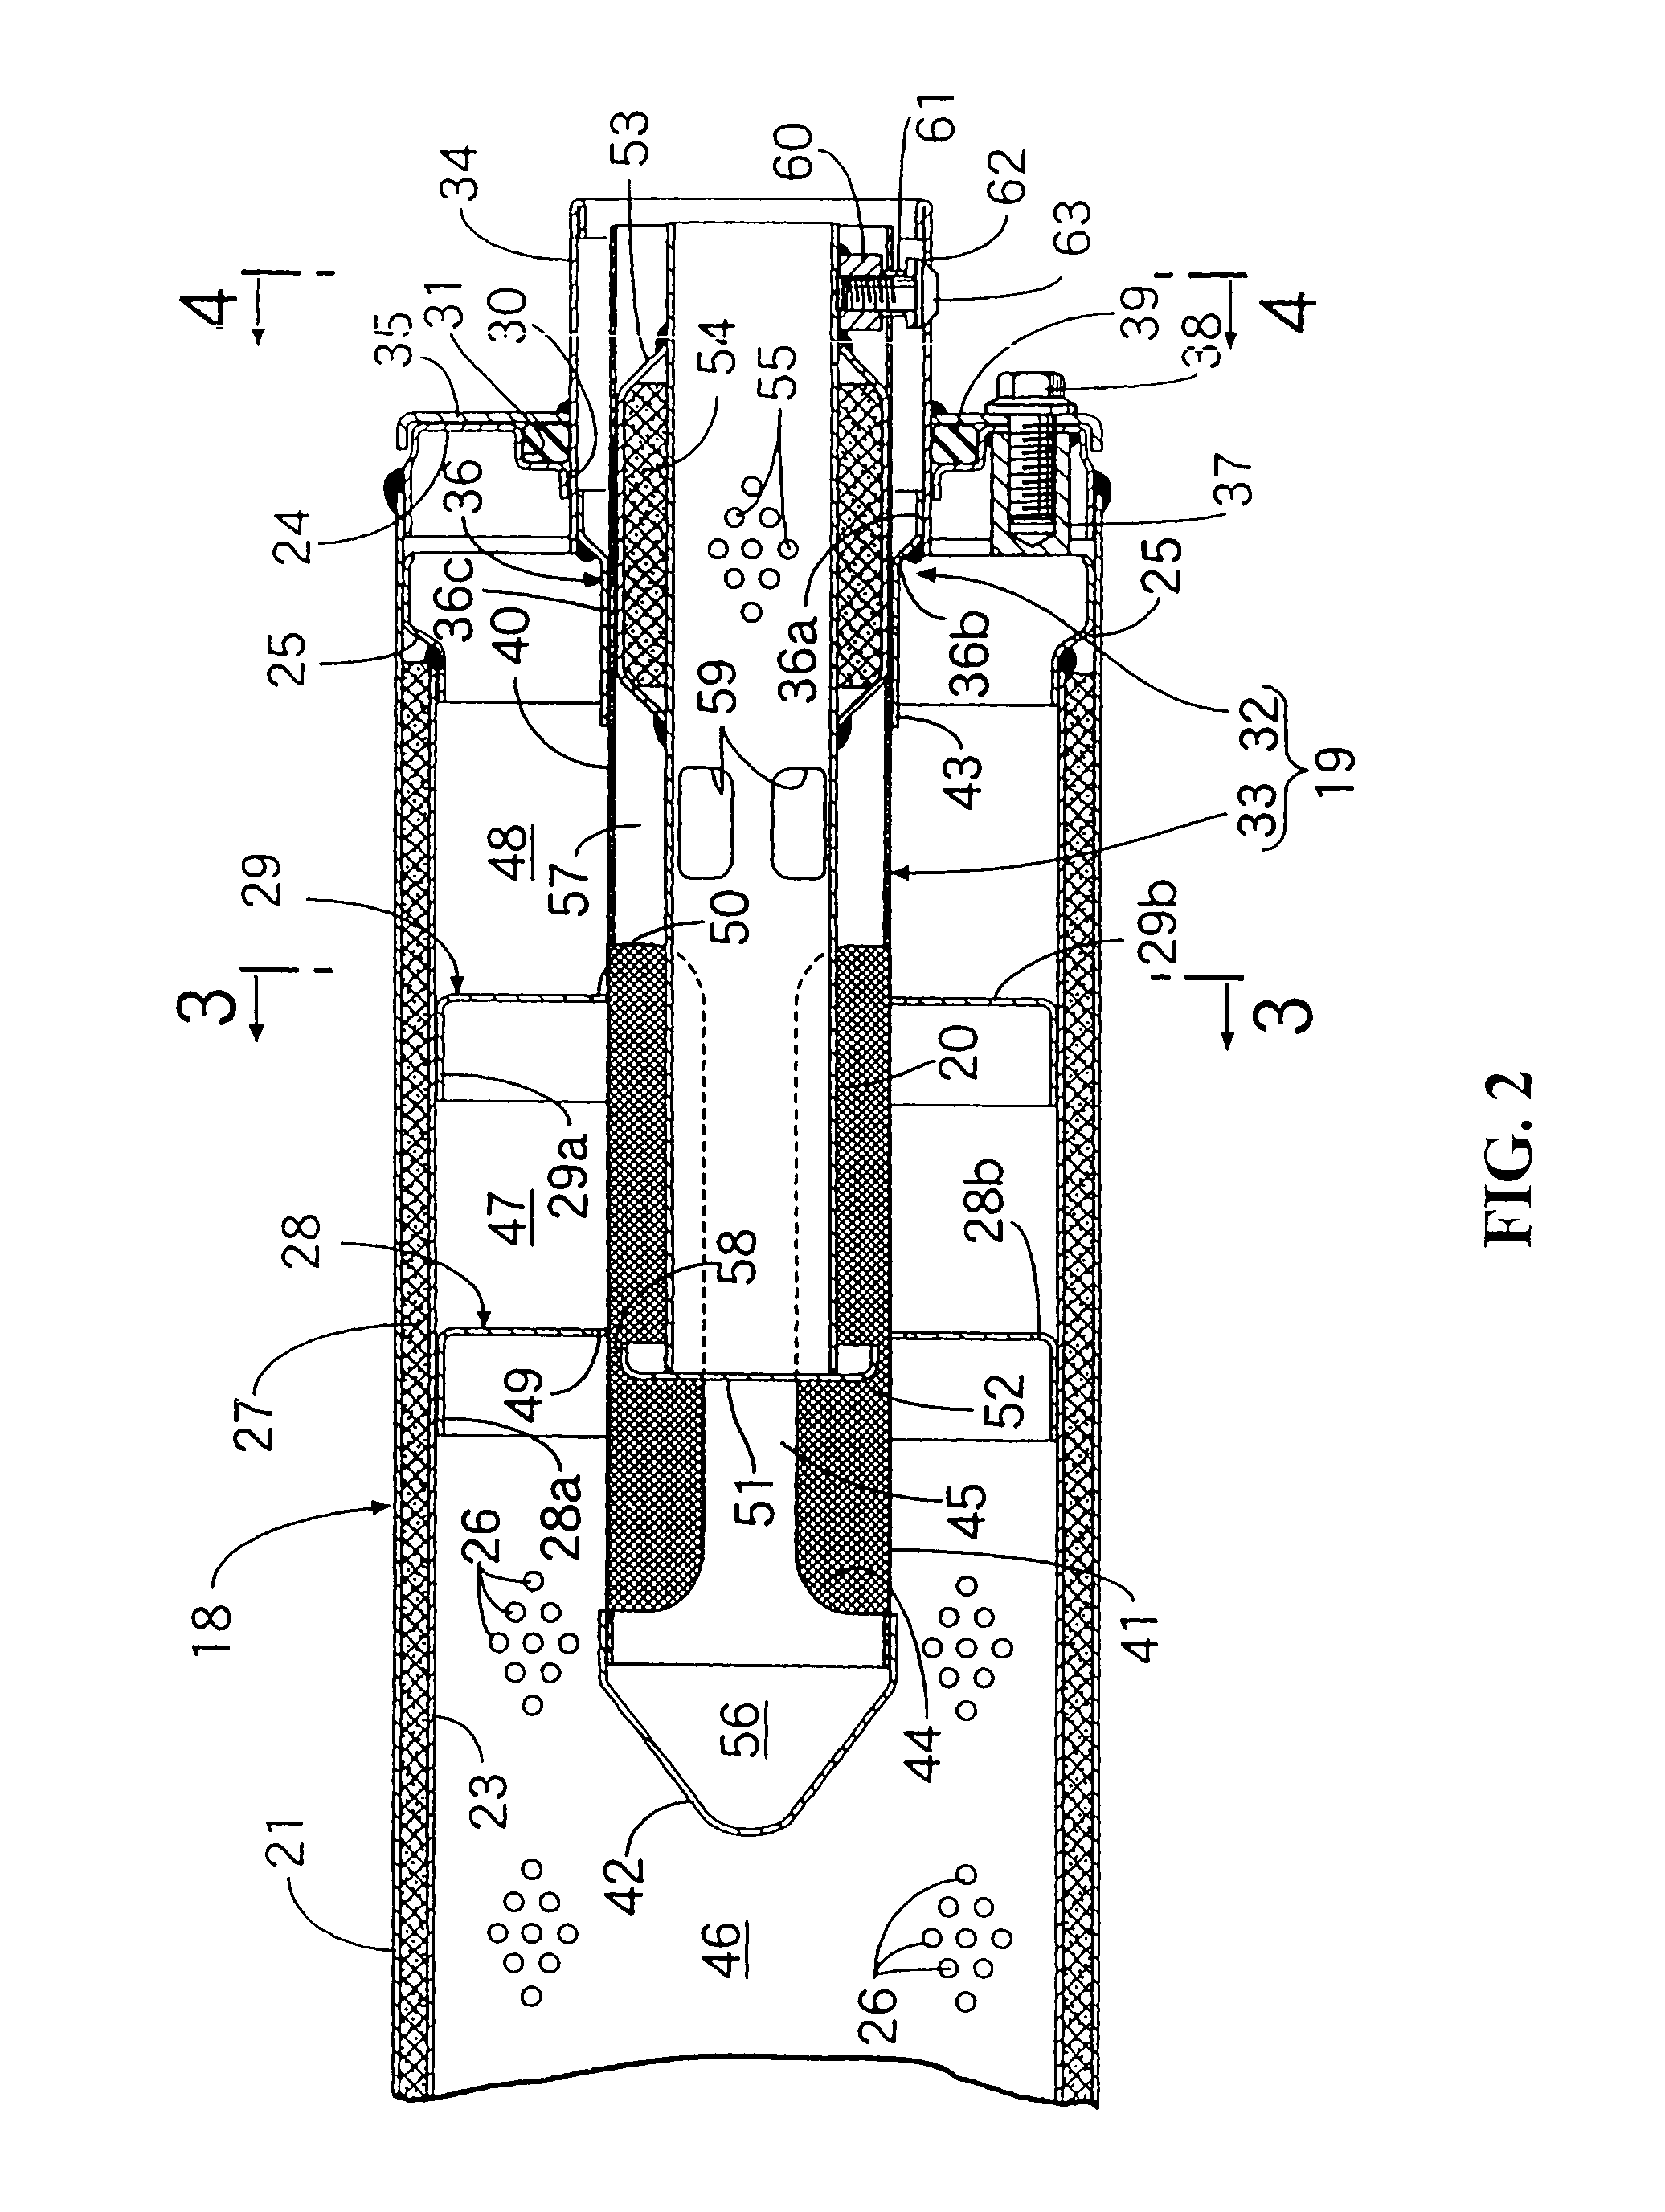 Exhaust apparatus for vehicle